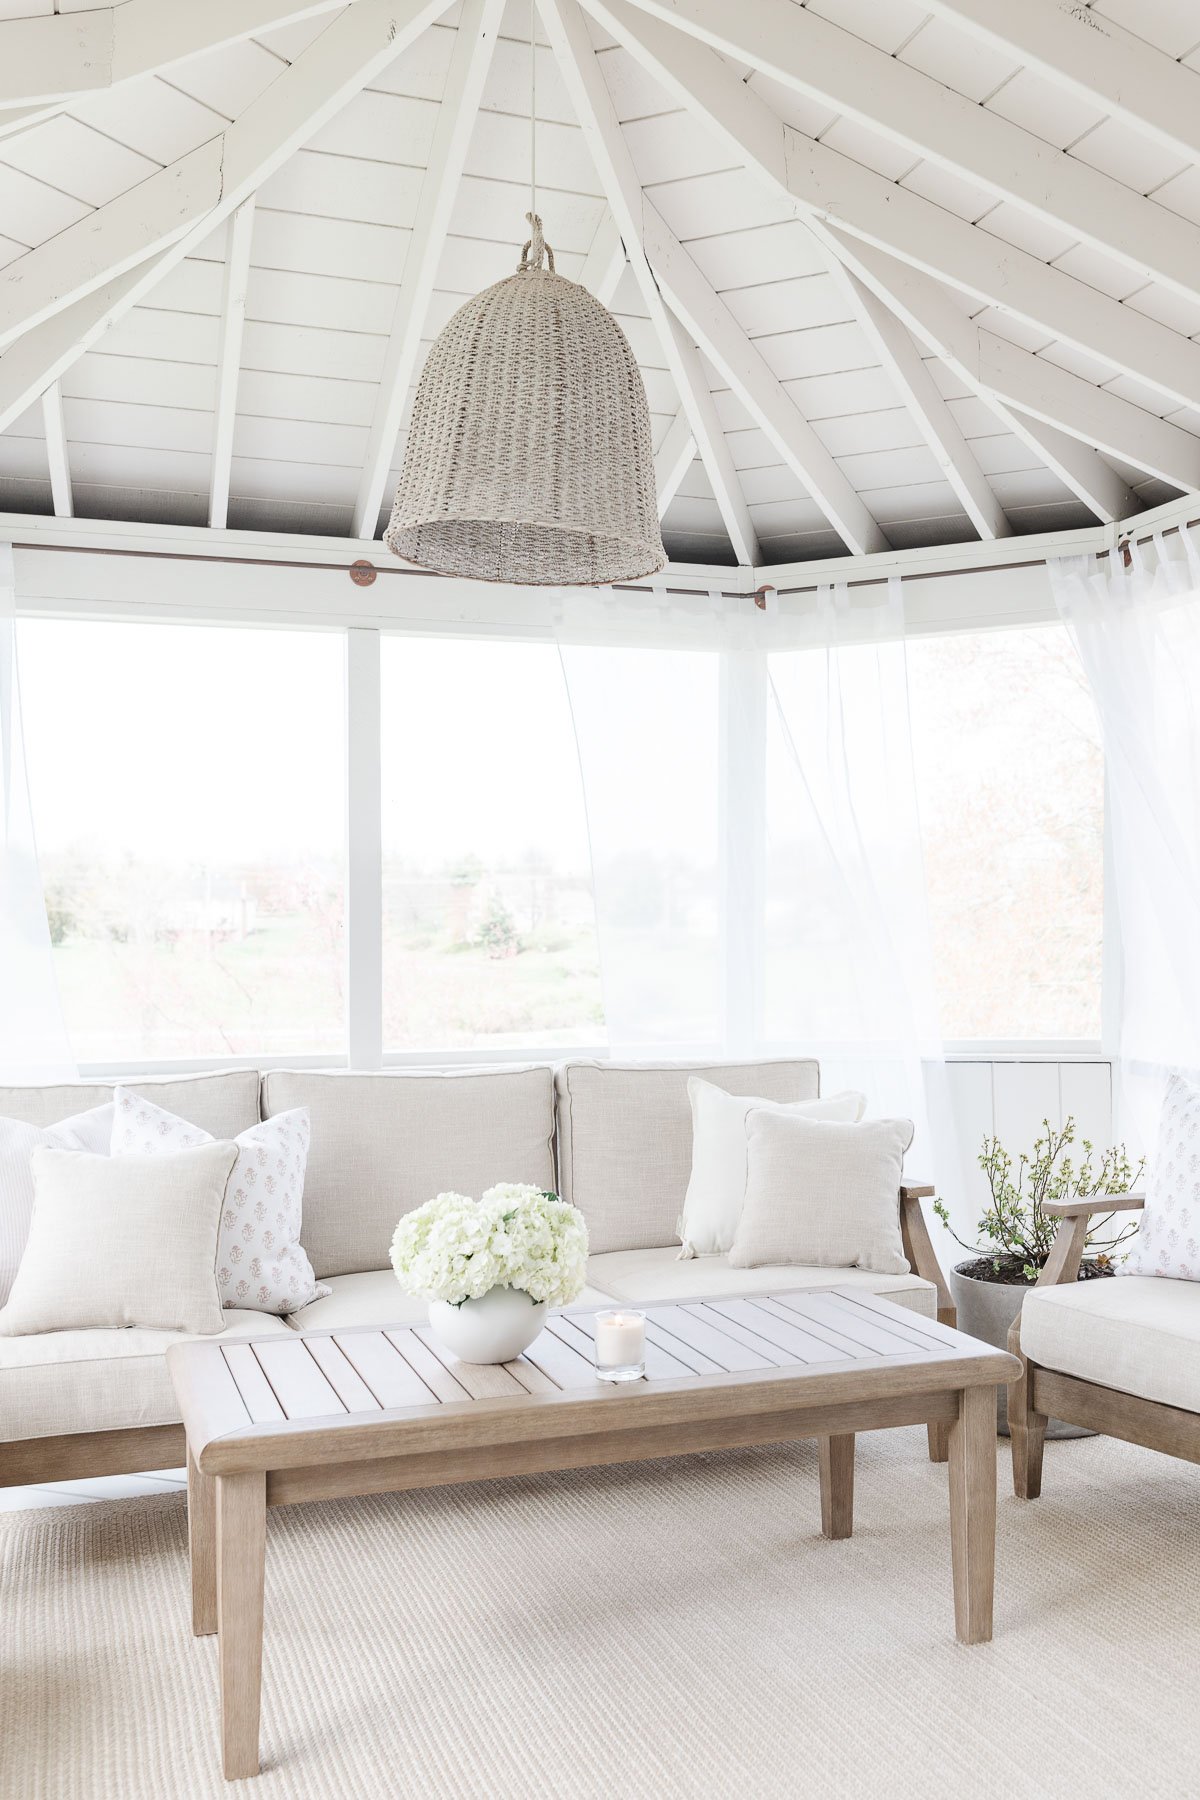 A bright, airy sunroom with white walls and ceiling, featuring a wooden table, cushioned seating with throw pillows, a hanging wicker light fixture, sheer curtains on DIY copper curtain rods, and a vase of white flowers on the table.